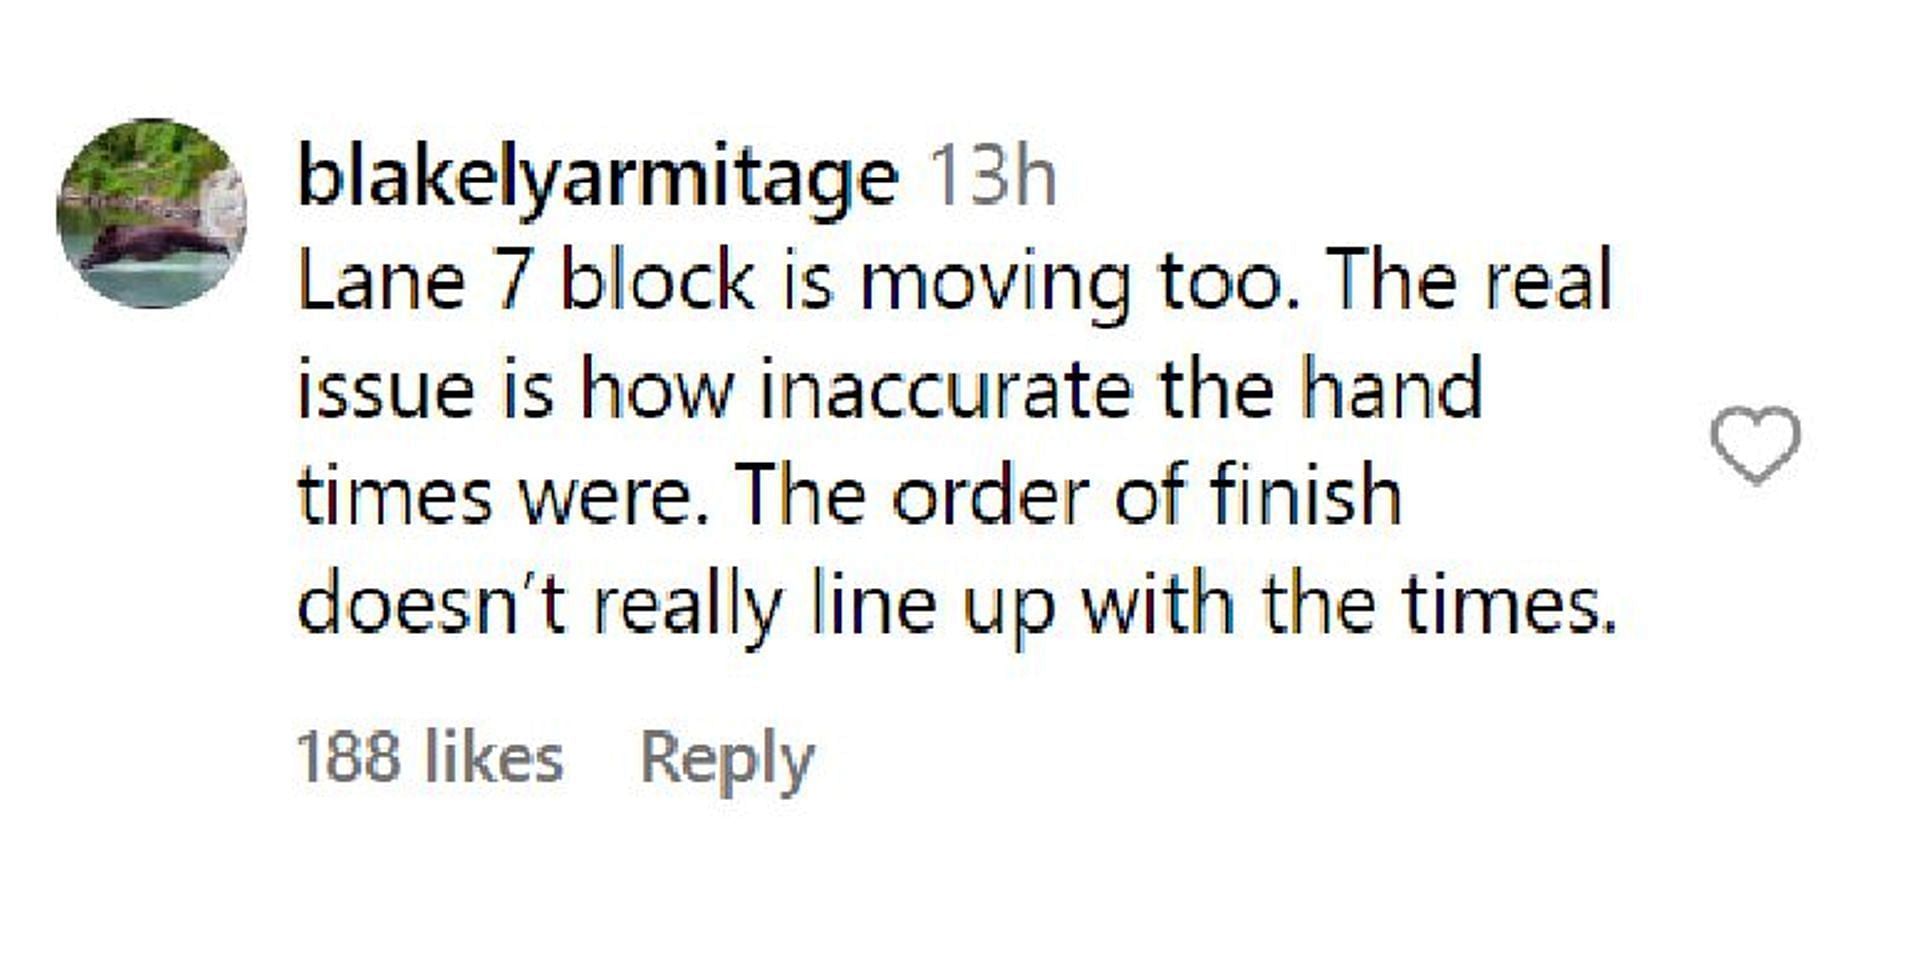 A fan highlighted that another block was moving as well.